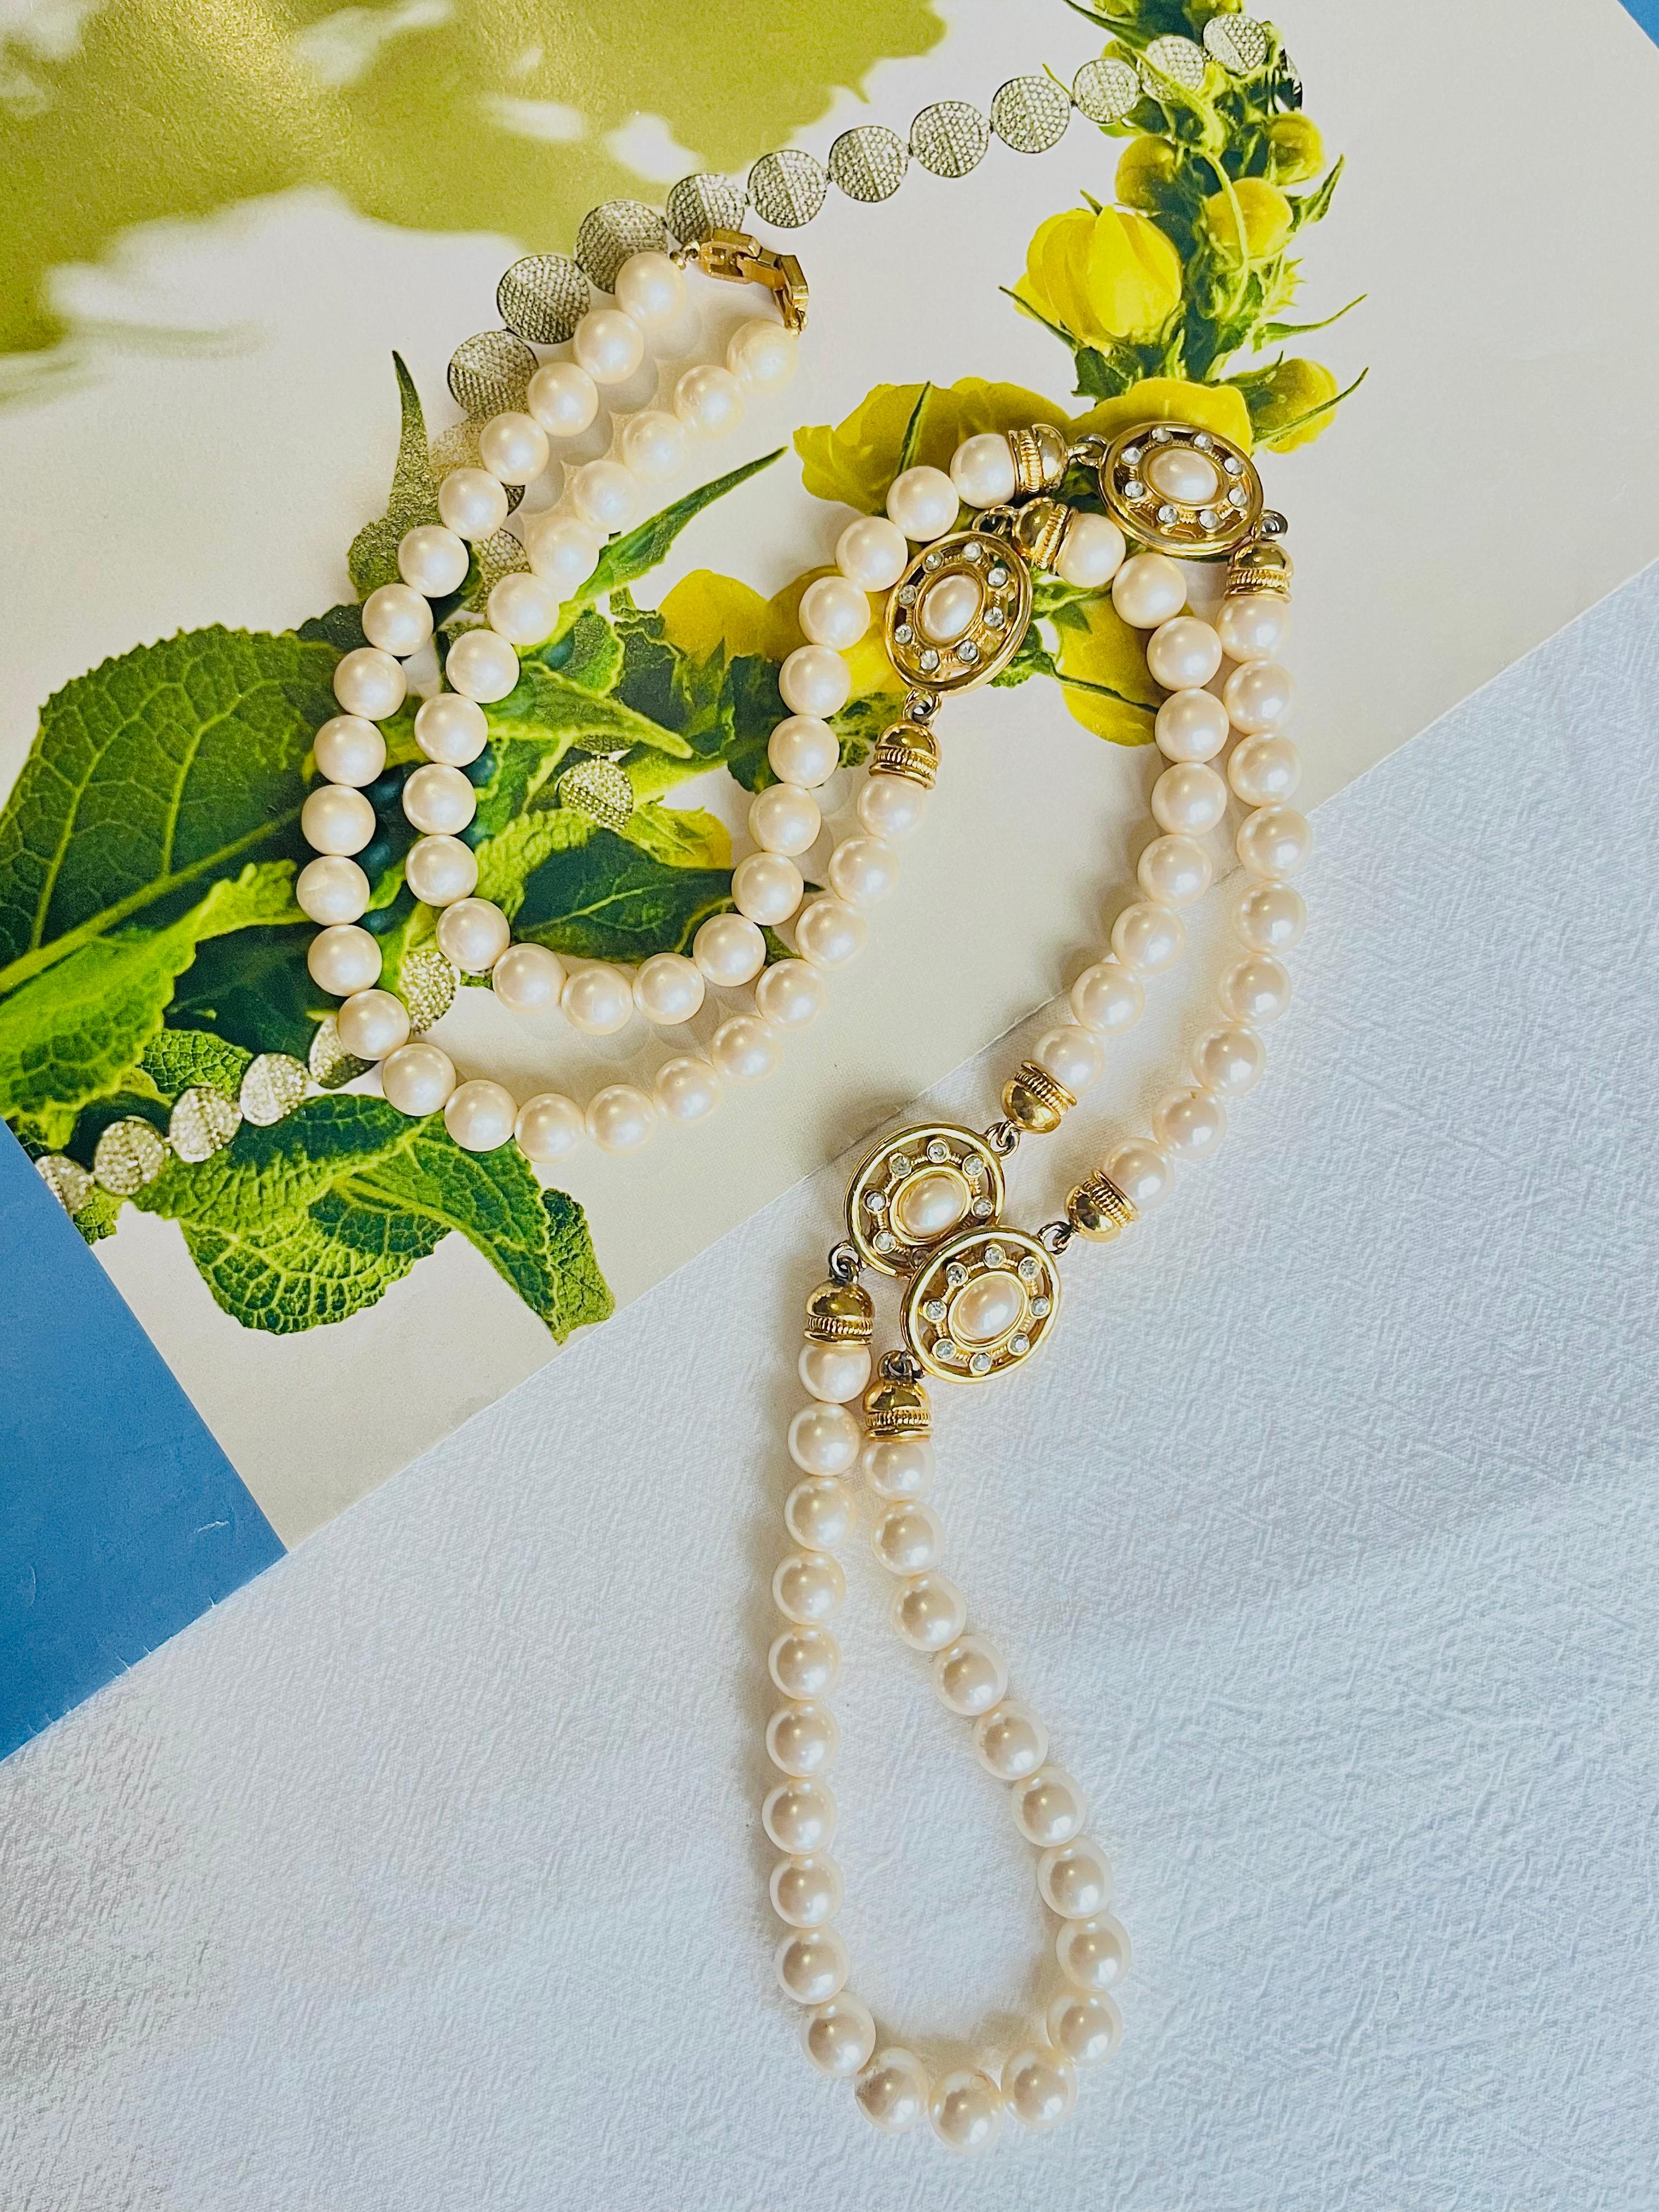 Very excellent condition. Very light scratches or colour loss, barely noticeable. 100% genuine. 

Signed at the clamp. Rare to find. A versatile faux pearl necklace. Can be also used as bracelet or belt.

Size: 100 cm.

Weight: 116 g.

_ _ _

Great